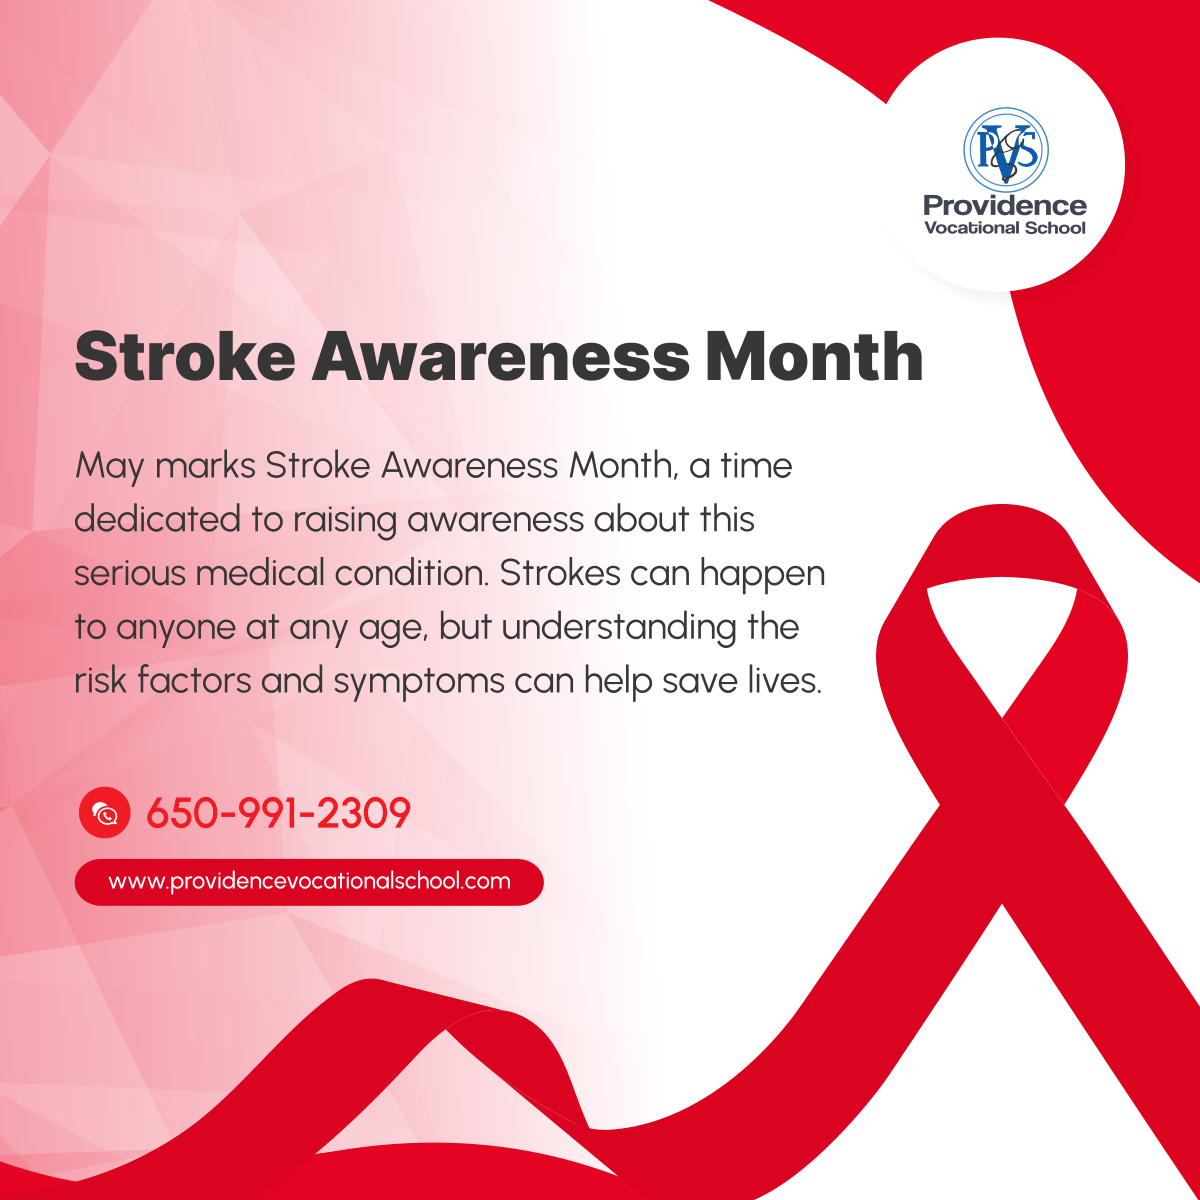 Knowledge is power when it comes to stroke prevention. Together, let's spread awareness and empower others to take control of their health.
 
#StrokeAwarenessMonth #VocationalSchool #DalyCityCA